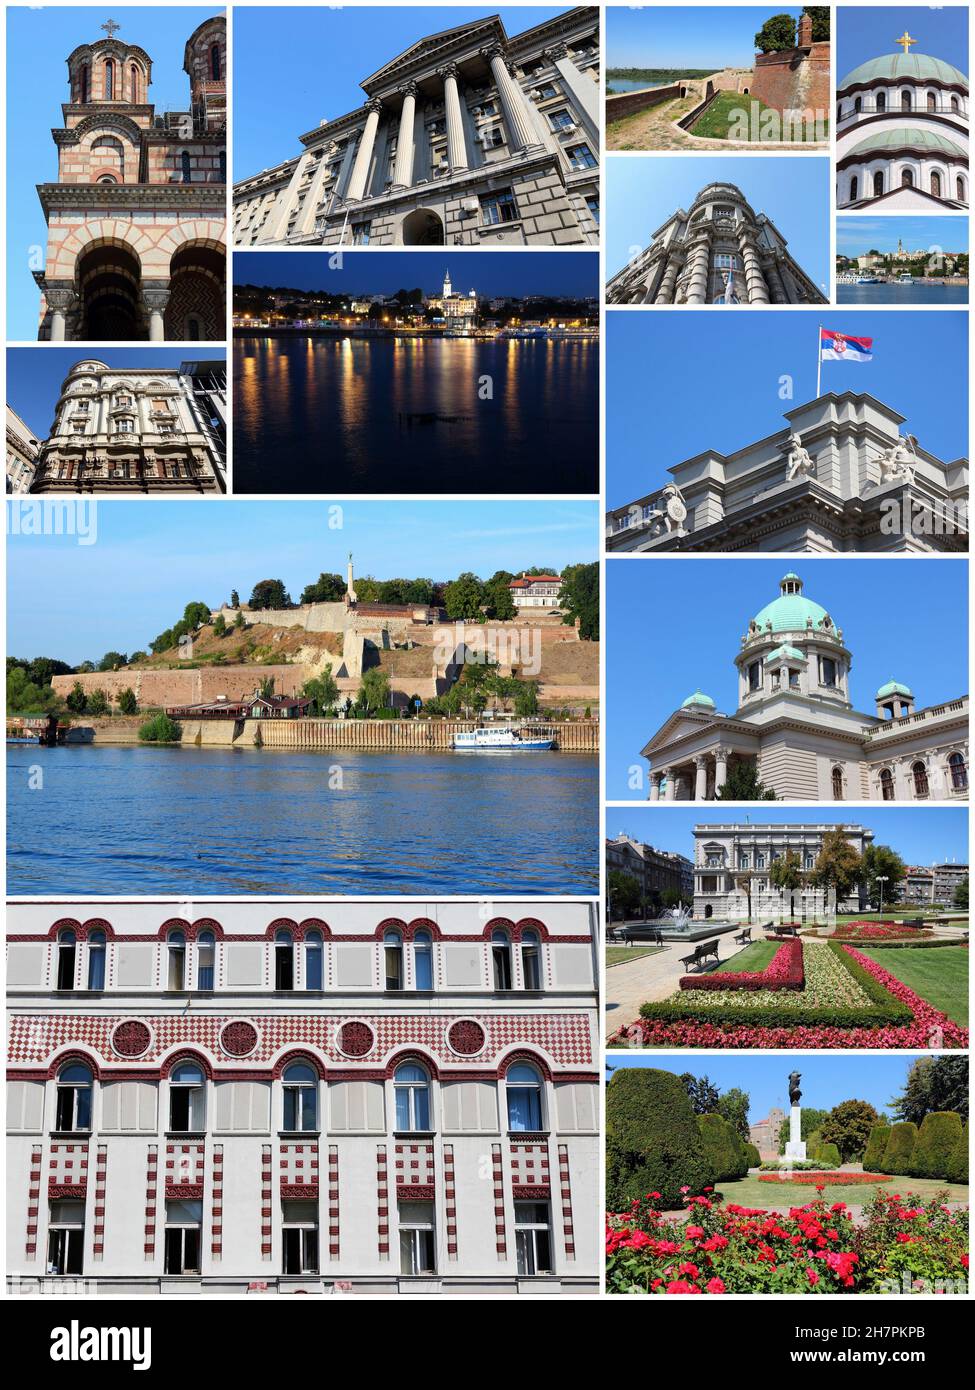 Belgrade, Serbia travel photo collage. Set includes major landmarks like Sava River skyline, Parliament and Cathedral. Stock Photo